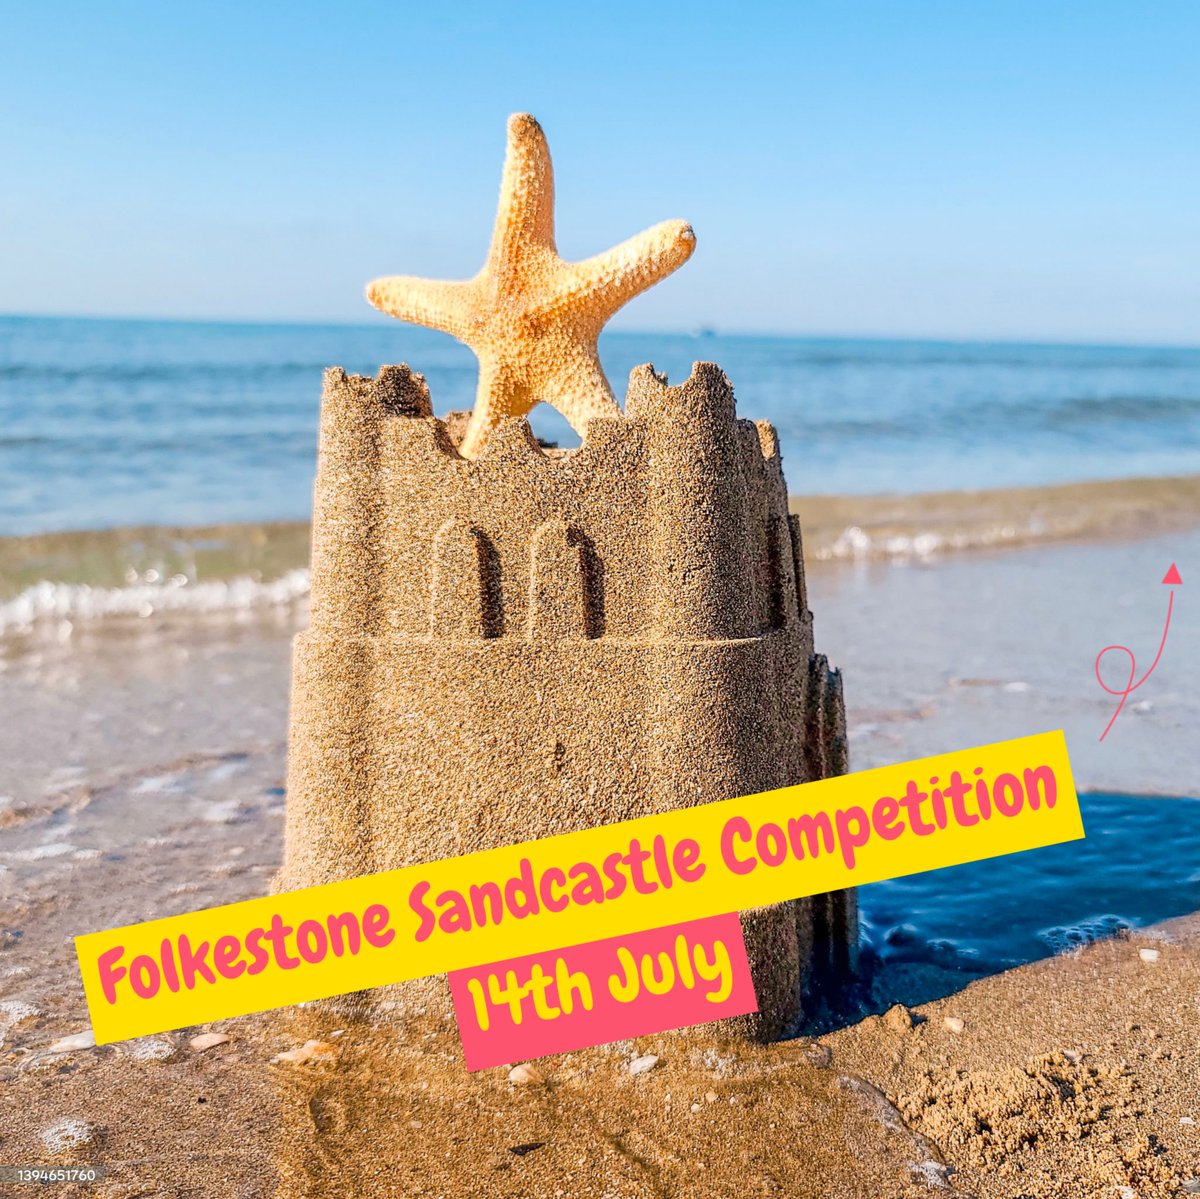 Calling all Sandcastlers! Grab your Bucket & Spades and come join us on Sunday 14 July 2024 for Folkestone’s Annual Sandcastle Competition. Why not round up the whole family, pack a picnic and come and get creative on our wonderful Sunny Sands. shane@shanerecord.com #folkestone